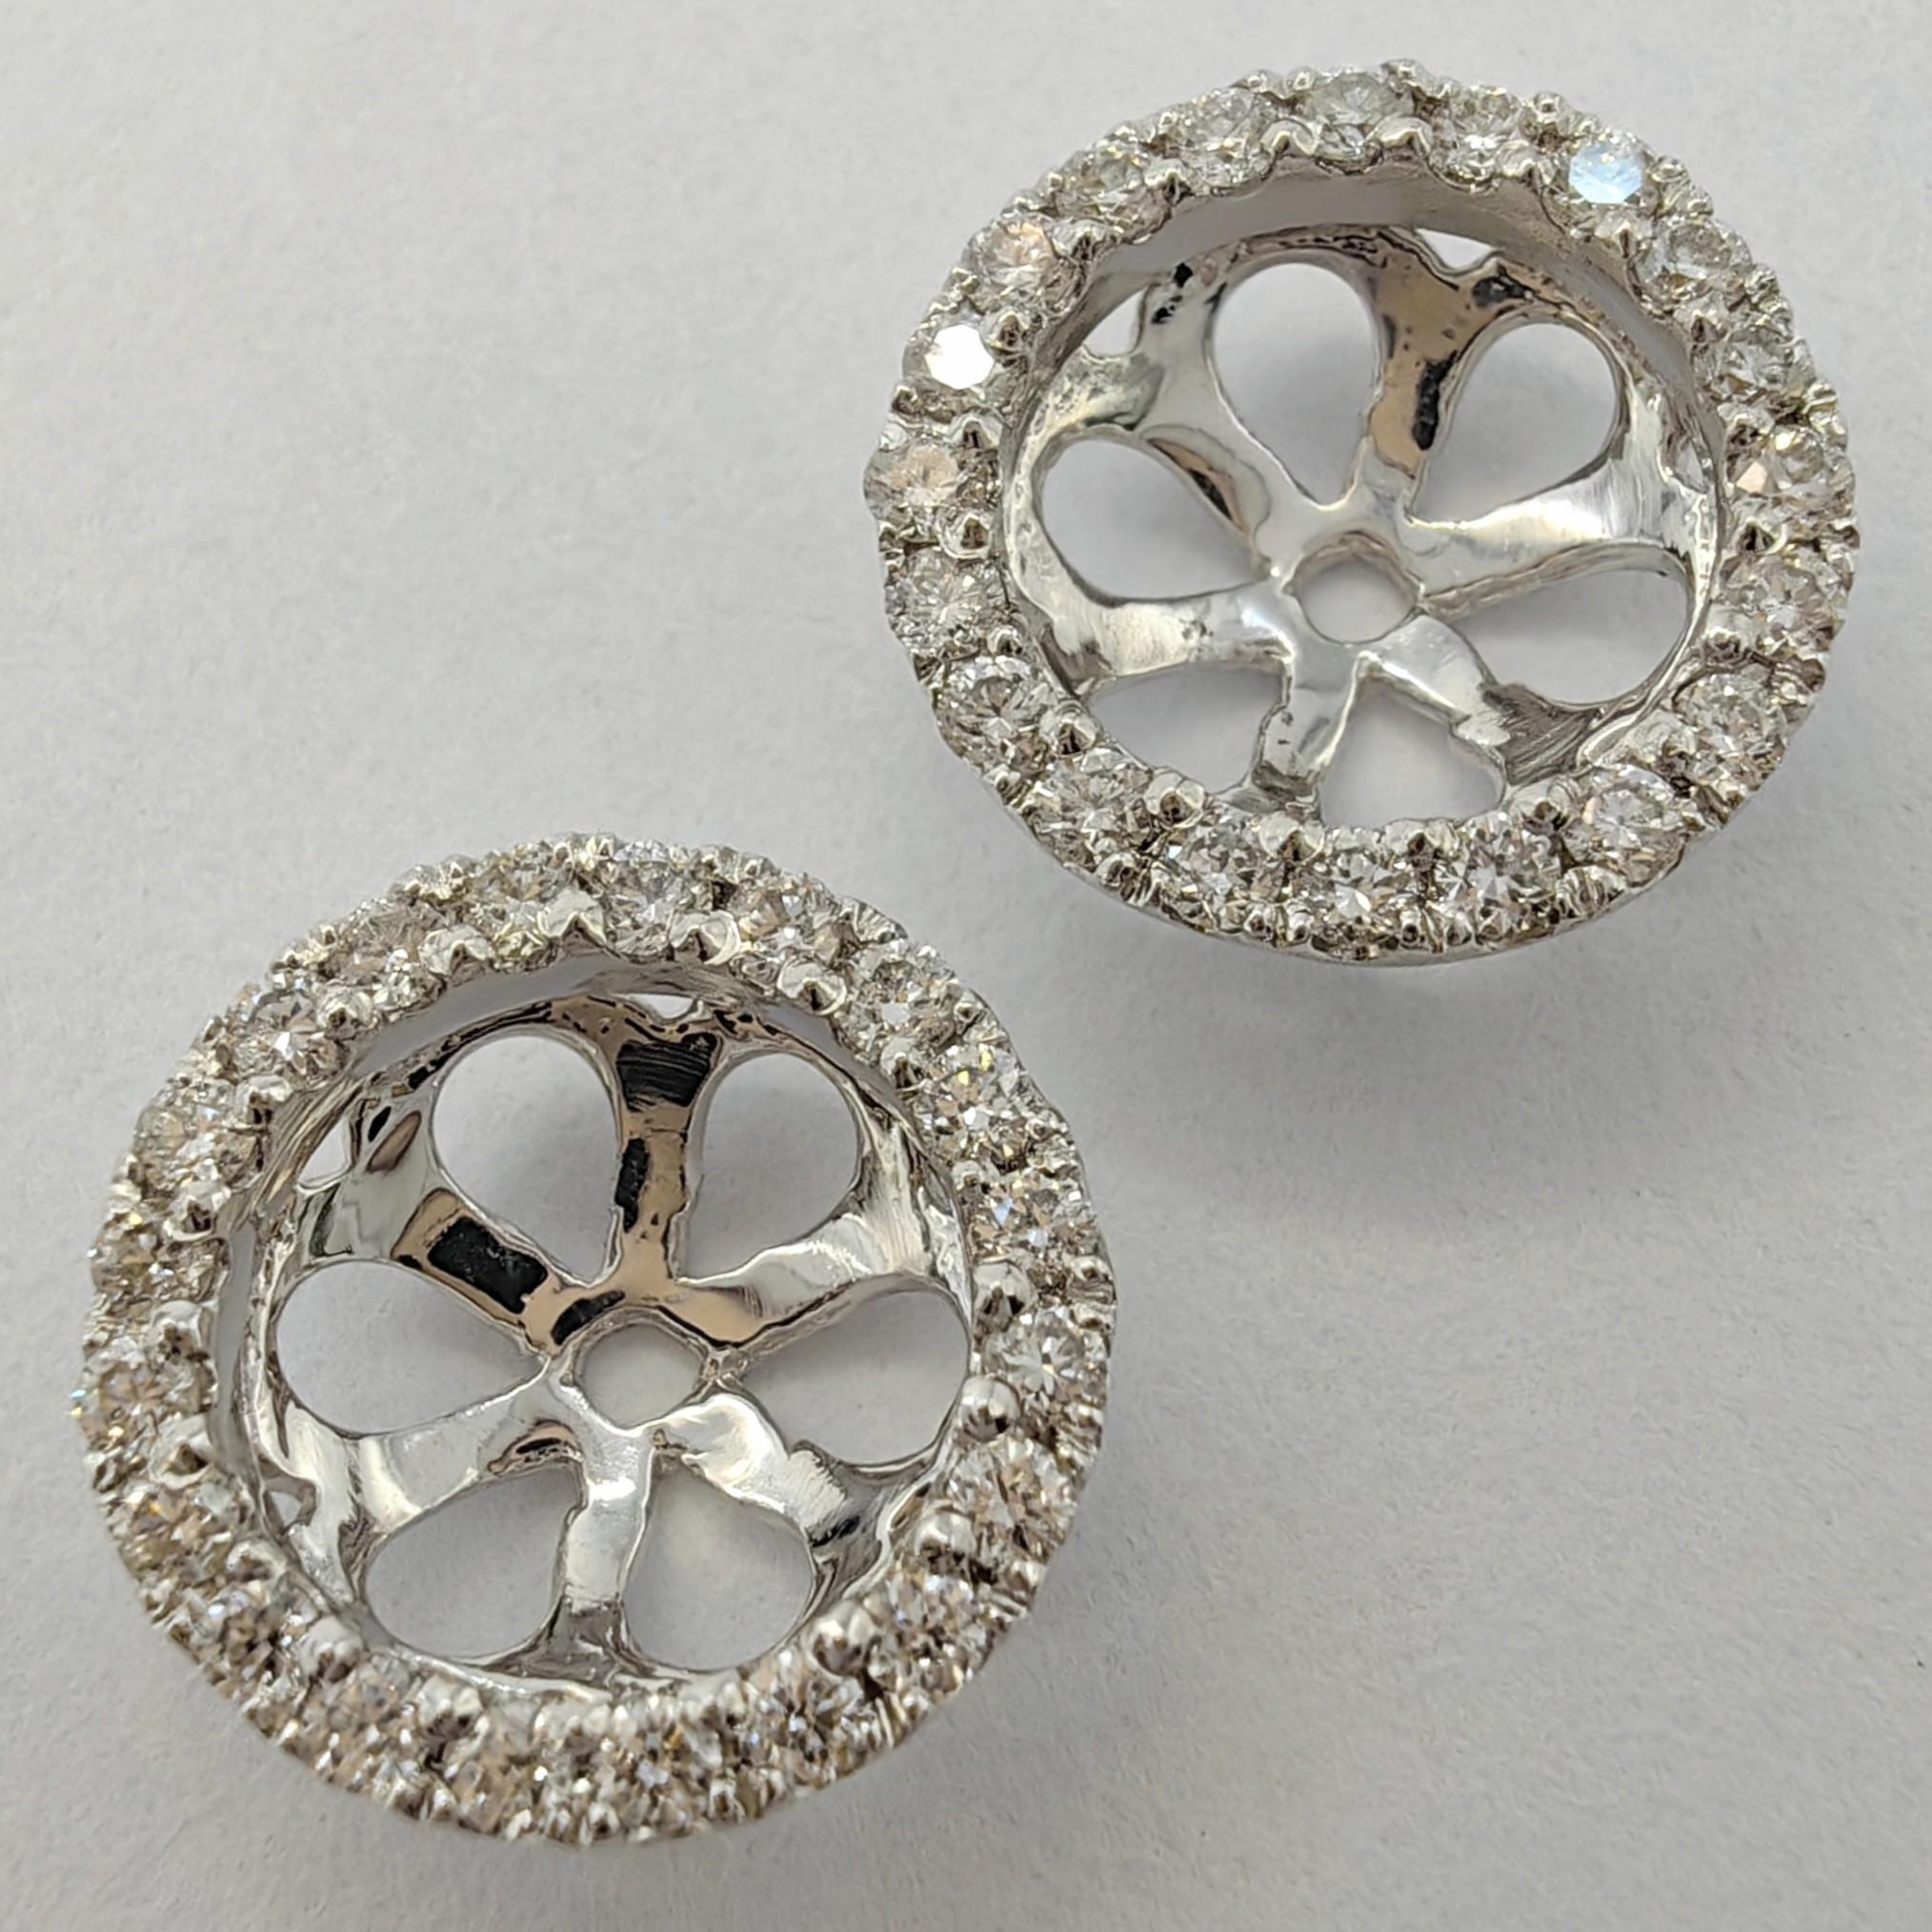 Introducing our .22ct Diamond Earring Jackets in 18K White Gold, a dazzling accessory that effortlessly elevates your earrings to a new level of elegance.

These earring jackets are adorned with 40 round brilliant-cut diamonds, totaling 0.22 carats.